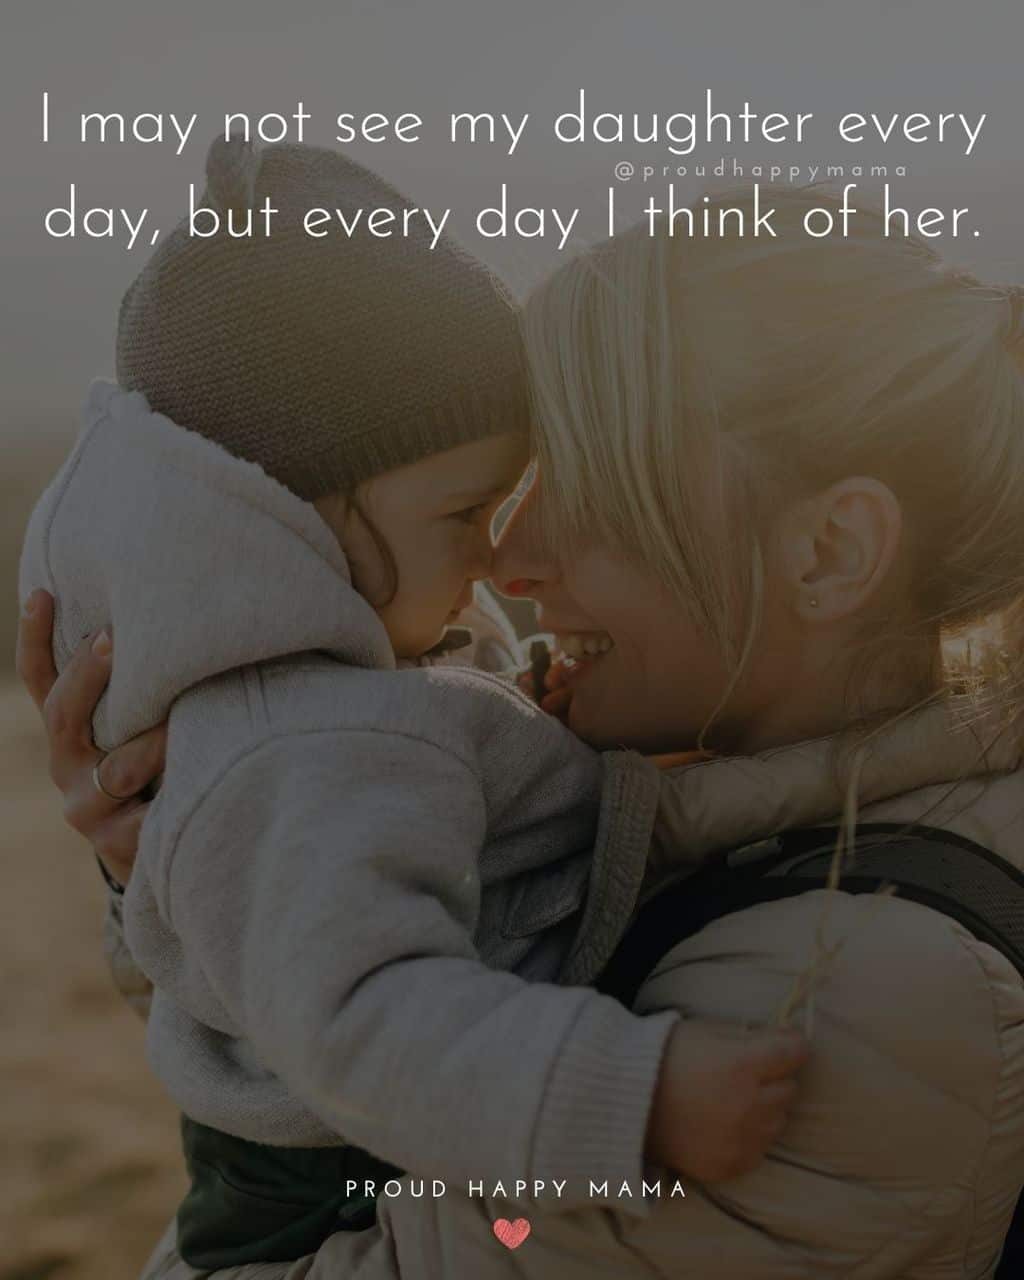 happiness is my daughter quotes - ‘I may not see my daughter every day, but every day I think of her.’